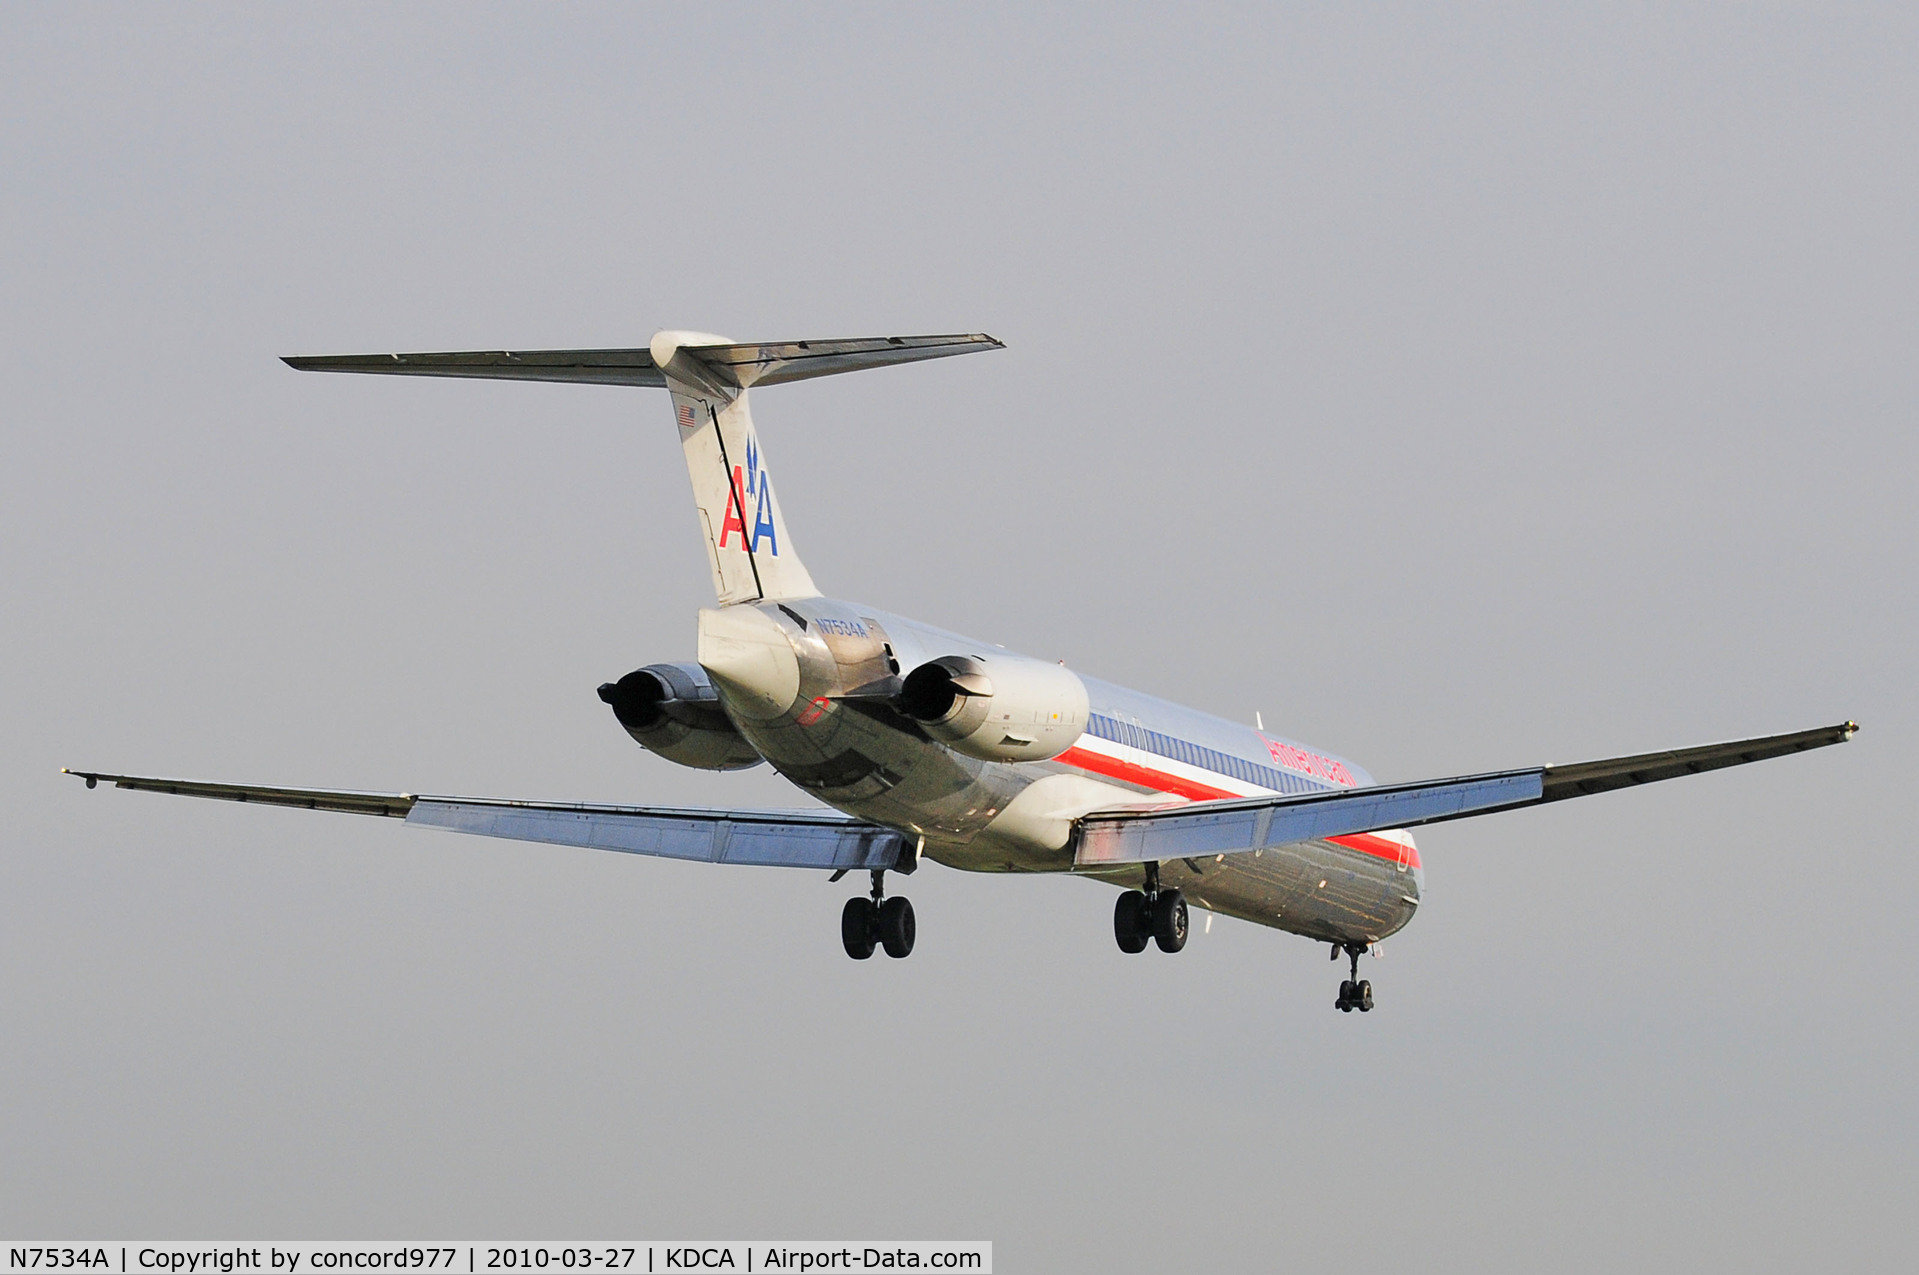 N7534A, 1990 McDonnell Douglas MD-82 (DC-9-82) C/N 49988, Seen at KDCA on 3/27/2010